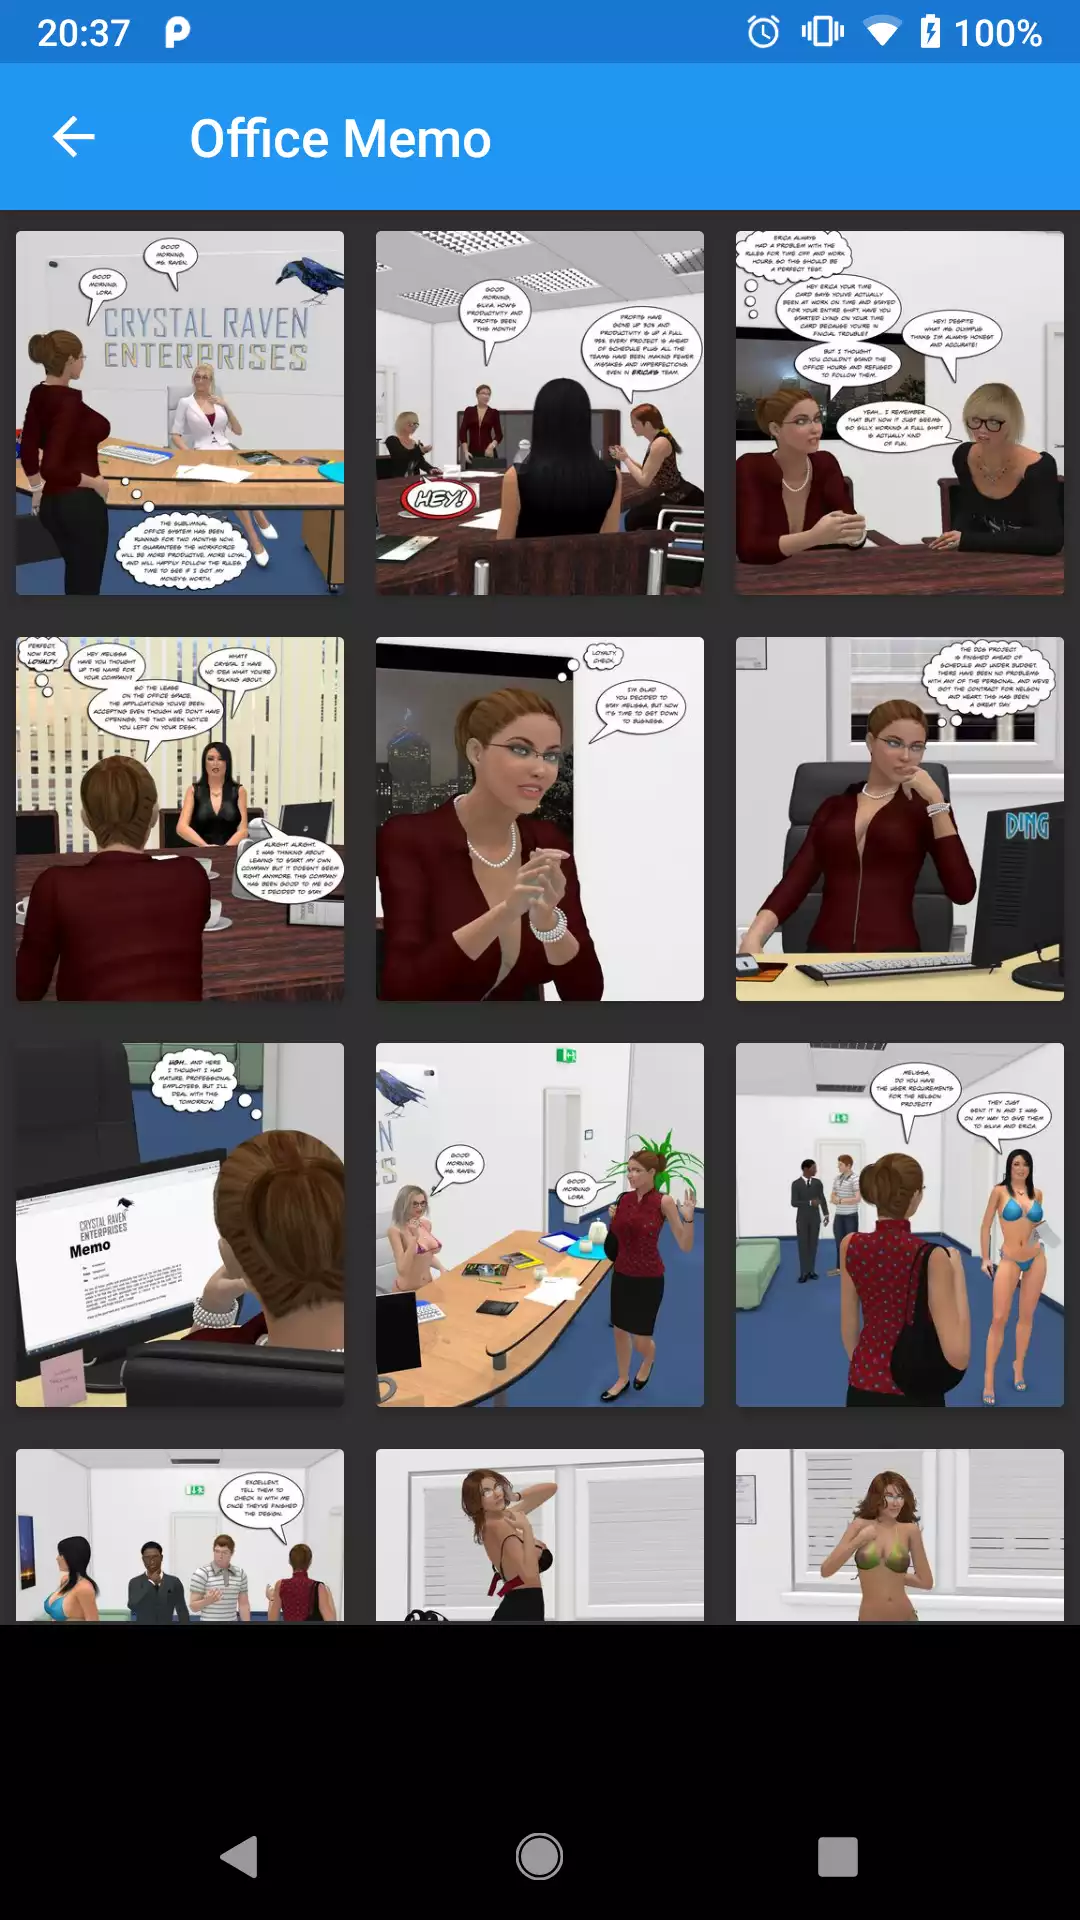 Office Memo apk,for,app,pics,pornstar,wallpapers,henti,office,pictures,hot,wallpaper,adult,hentai,comics,drawings,apps,android,sexy,erotic,pice,anime,porn